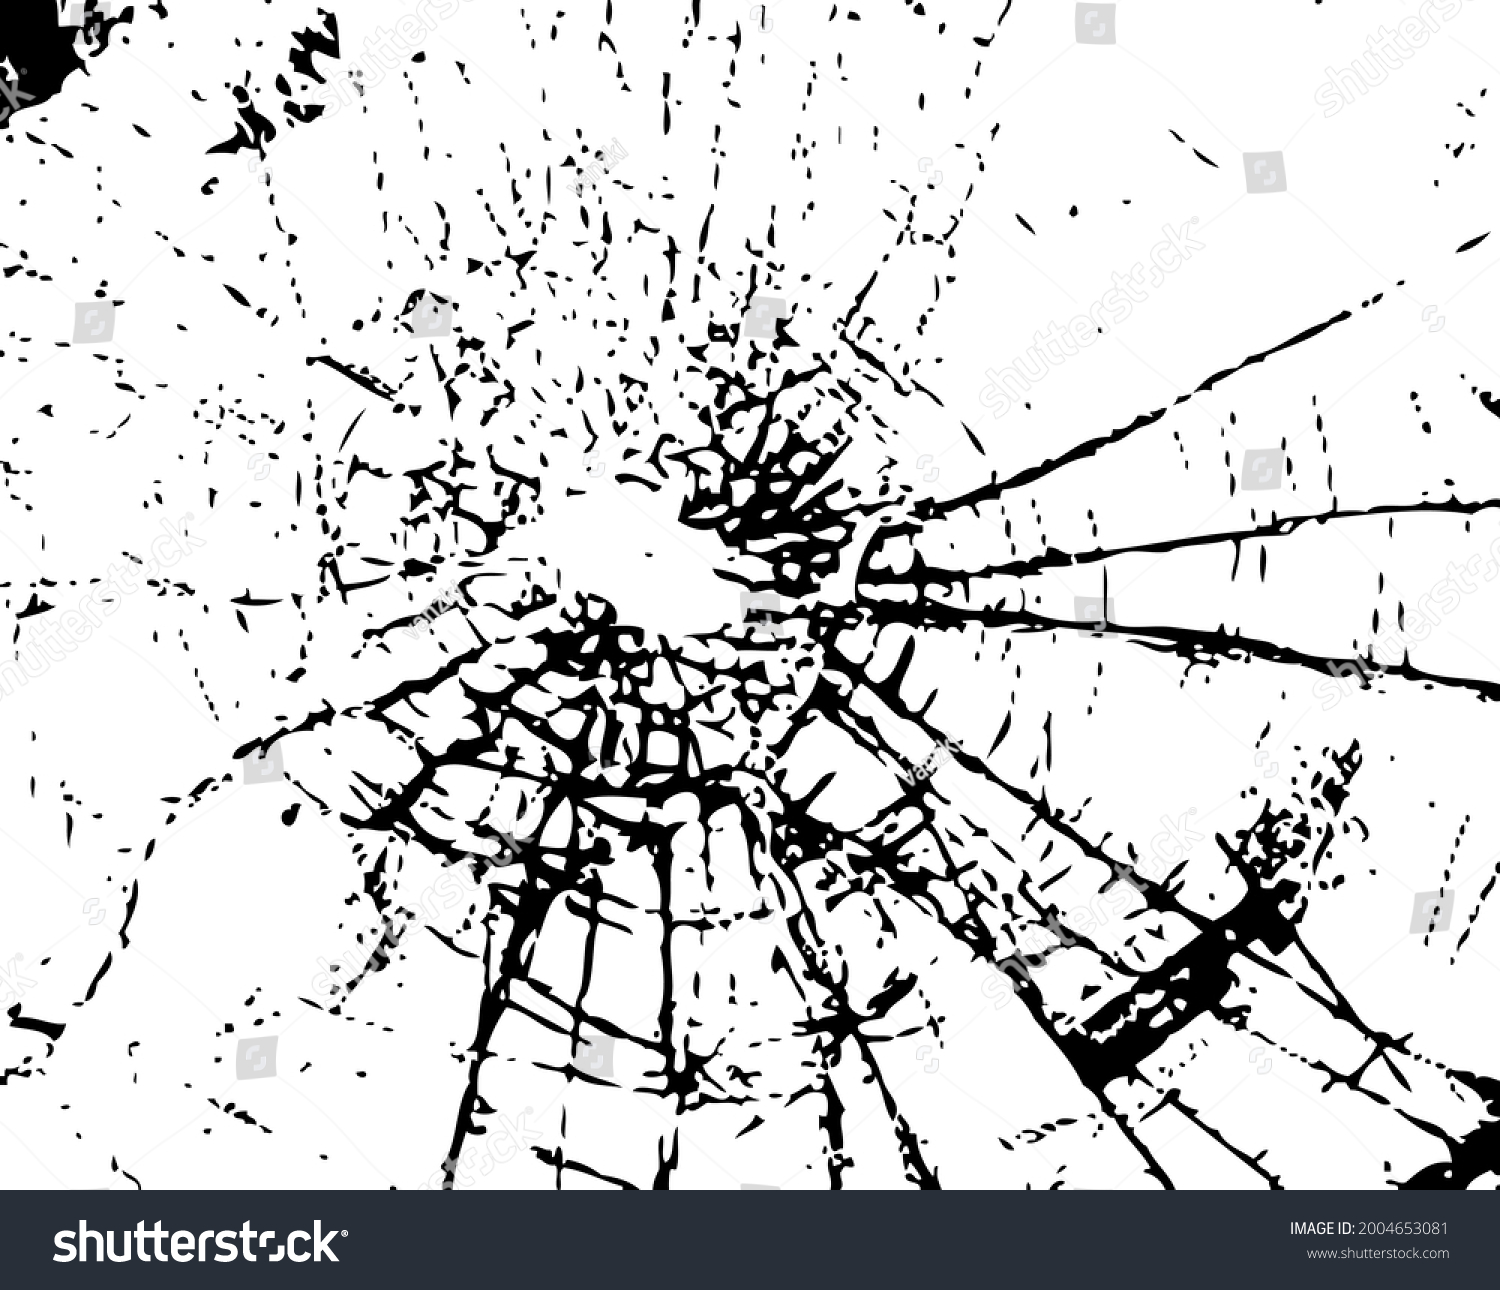 SVG of Background Vector illustration broken and crack glass isolated on white background svg